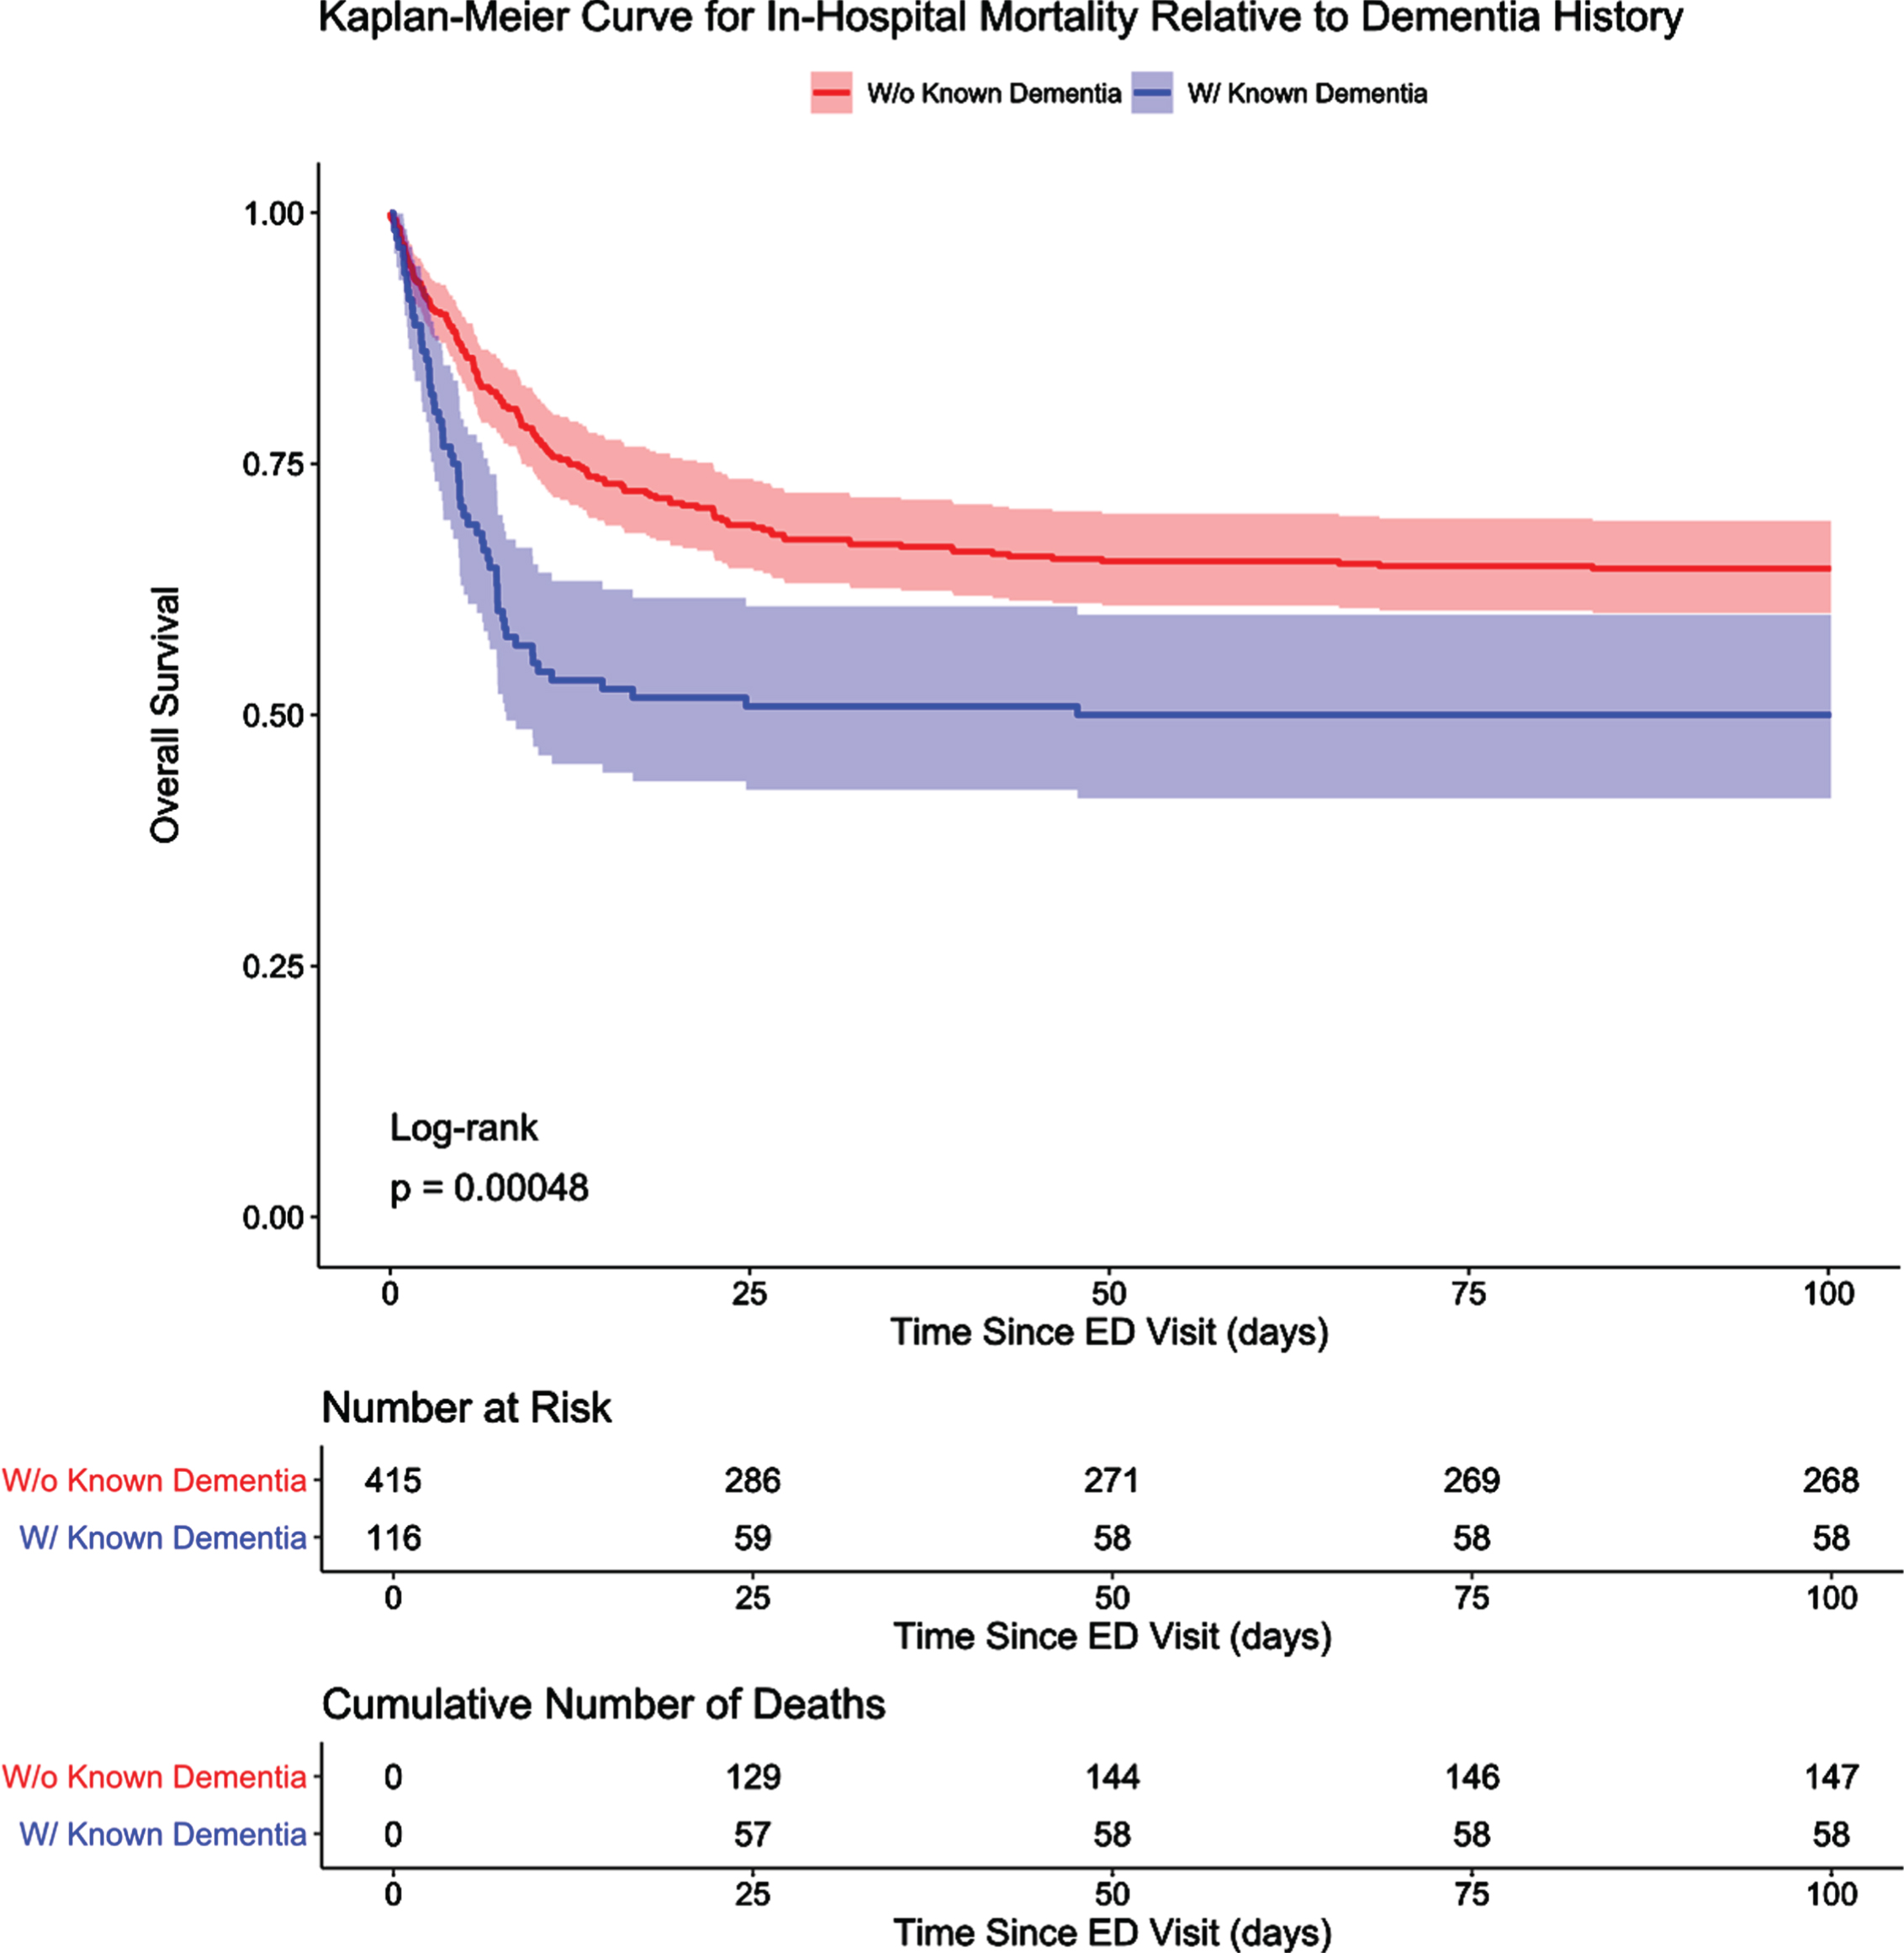 Kaplan-Meier Curve for In-Hospital Mortality Relative to Dementia History. Overall survival for patients with dementia and those with no known history of dementia are presented in an unadjusted Kaplan-Meier curve. Shading indicates 95%confidence intervals. Discharged alive patients were considered event-free and only censored at the maximum length of stay value in this study, which was approximately 100 days. Patients with dementia died earlier in their hospital course and had significantly lower overall survival than patients with no known history of dementia.